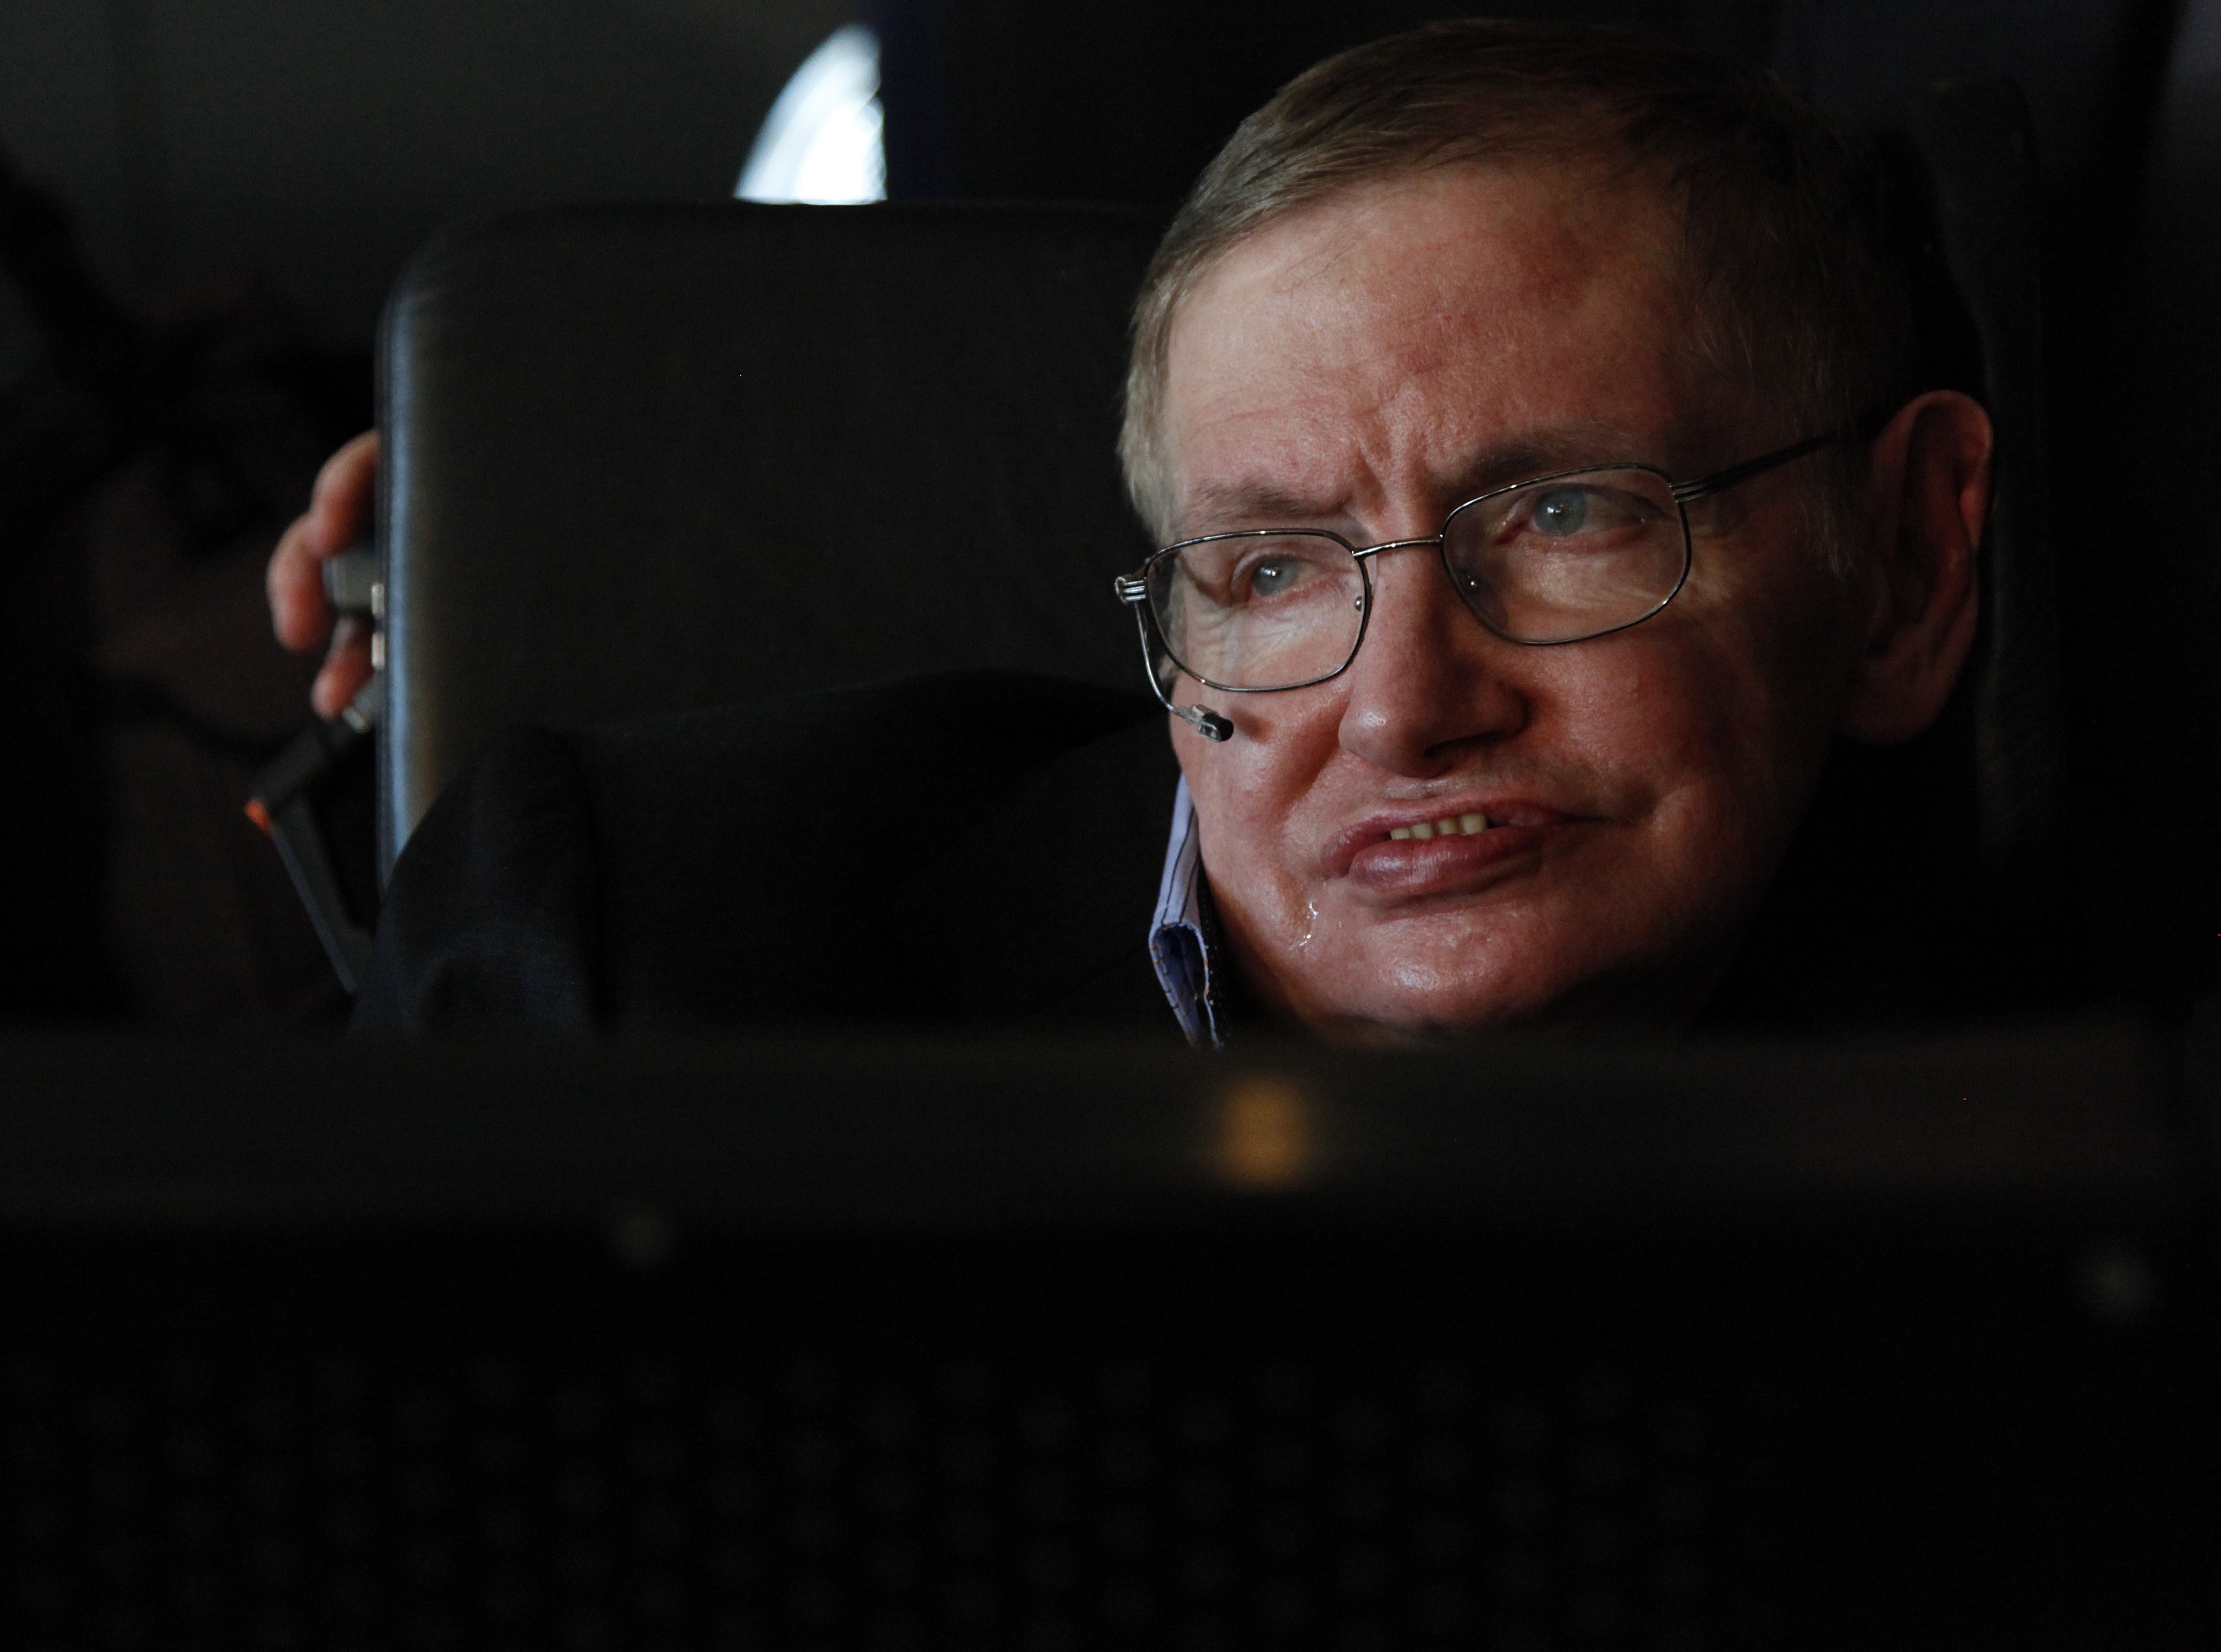 Stephen Hawking died aged 76 on March 14 after a cosmic career in which his mental genius transcended his physical disability.